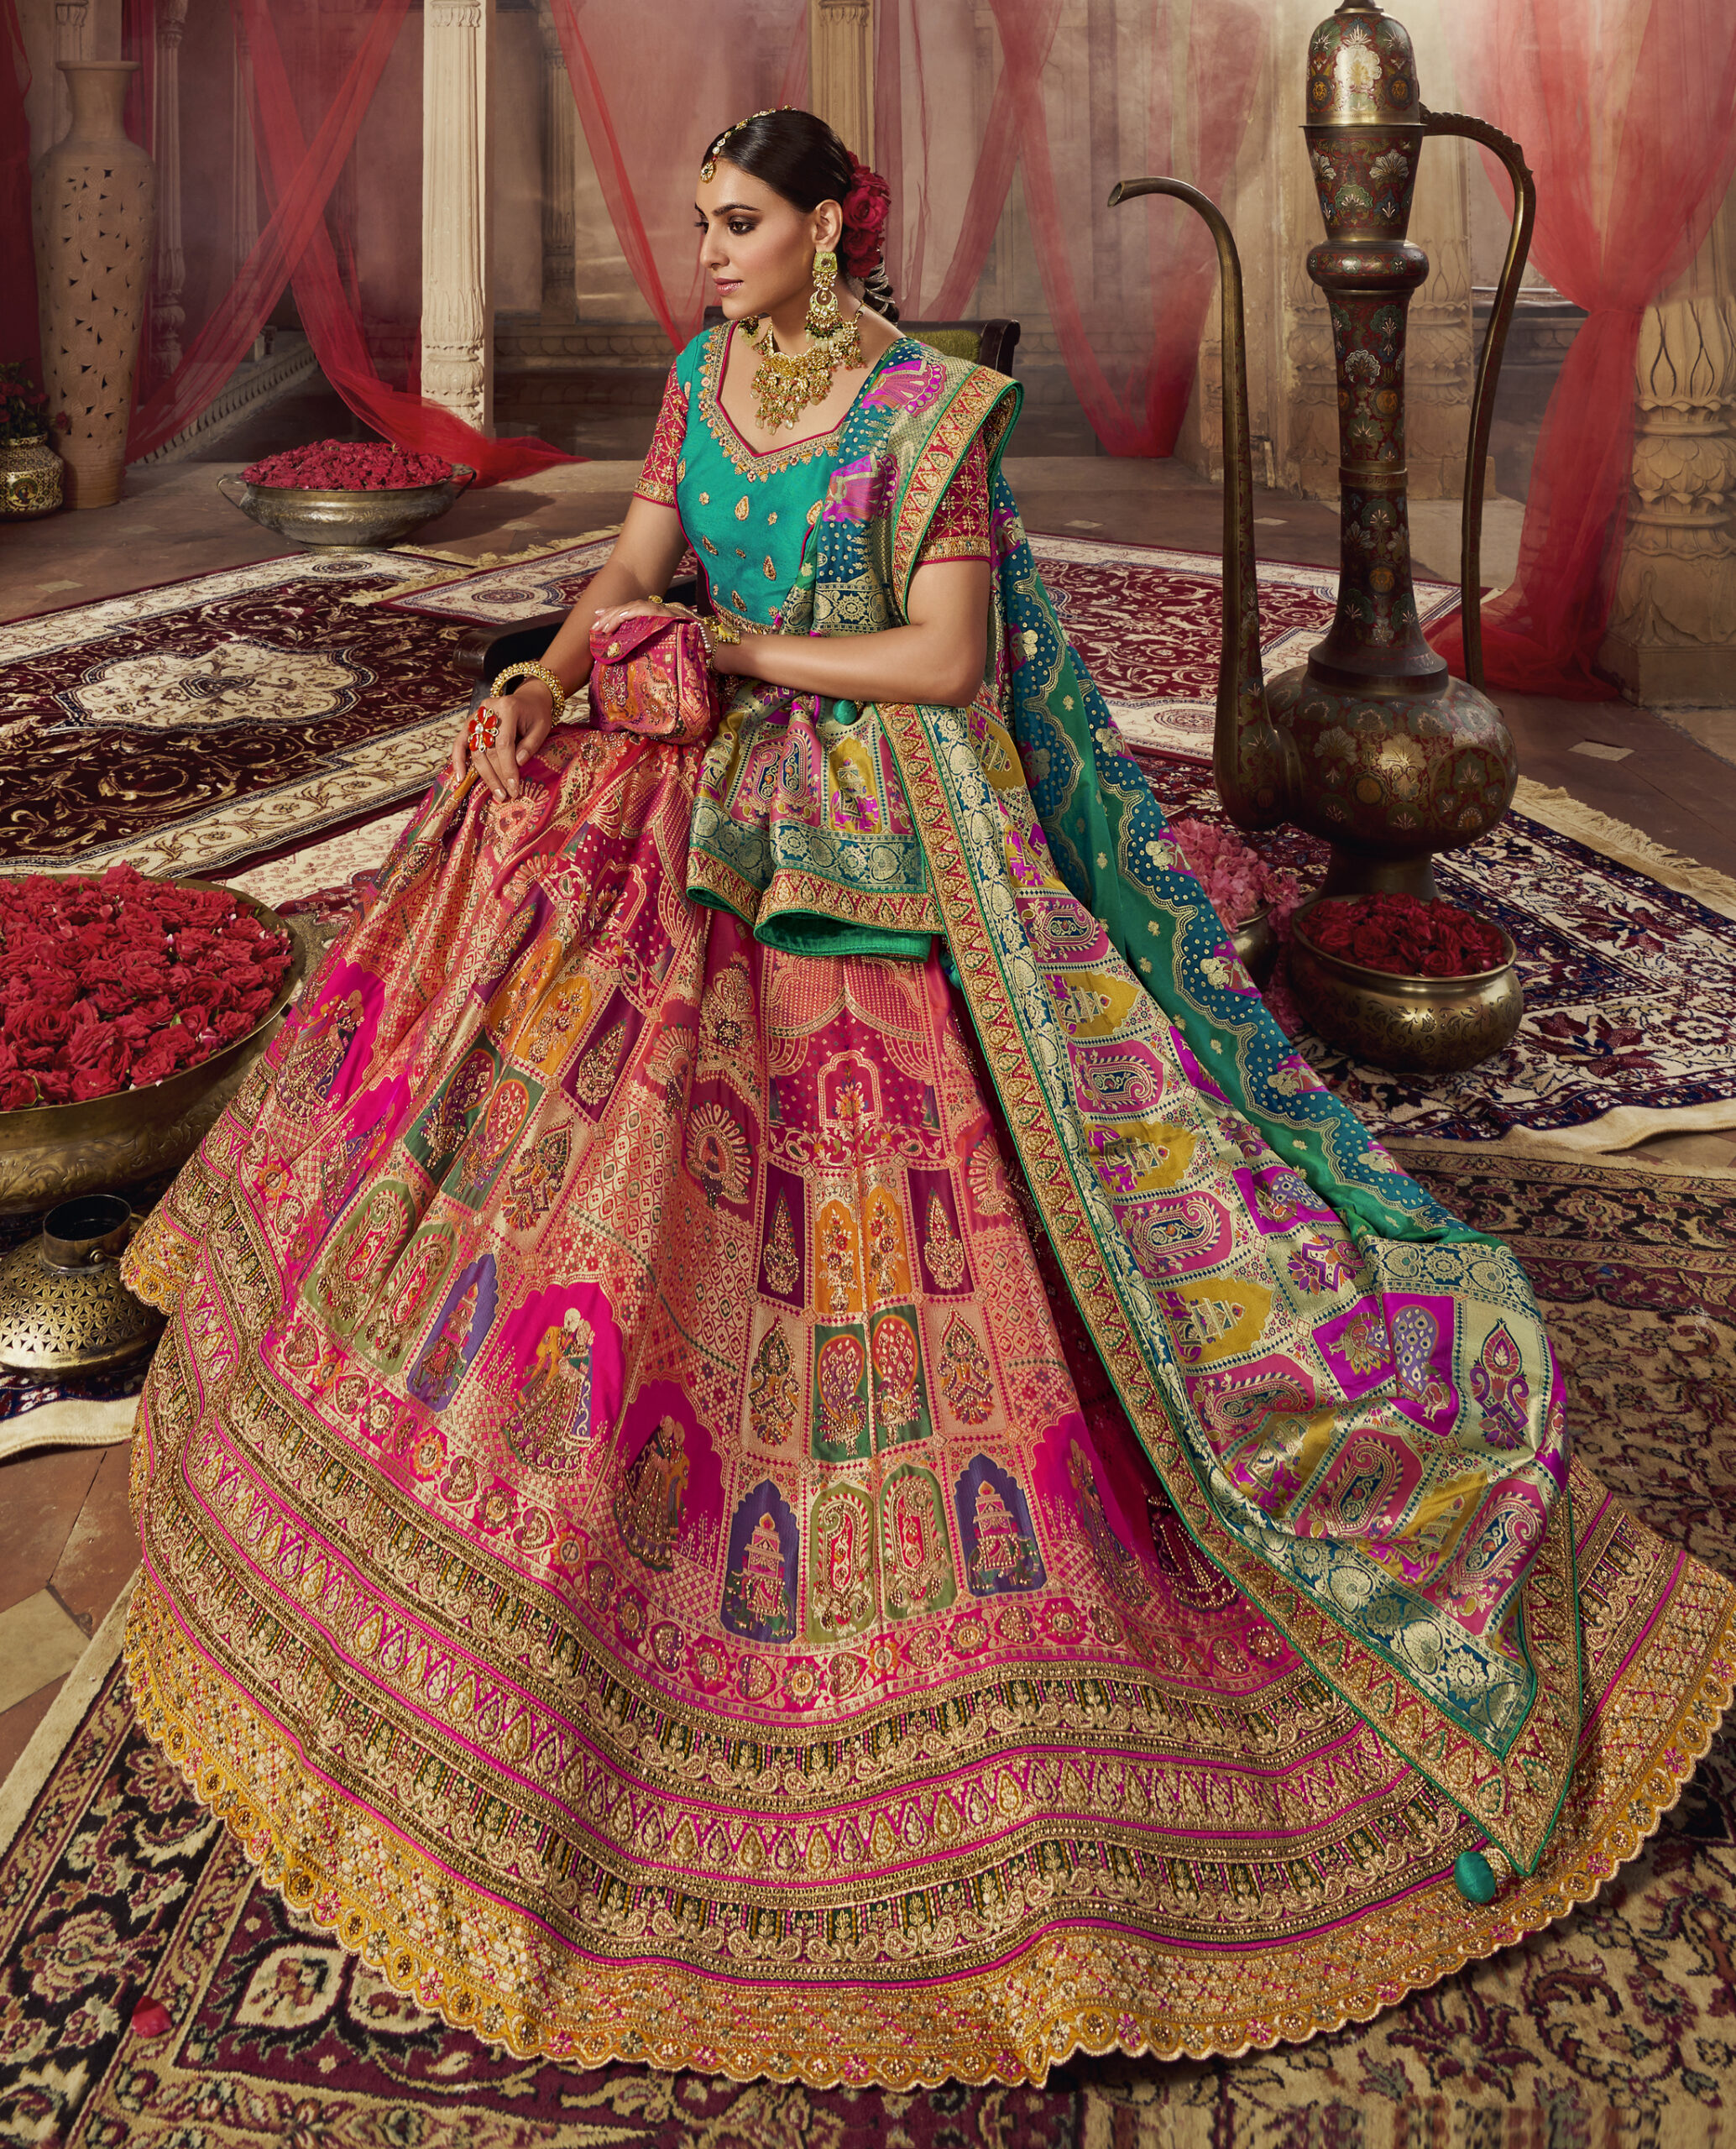 Pothys - For the bride of early 2018, a bridal #lehenga... | Facebook